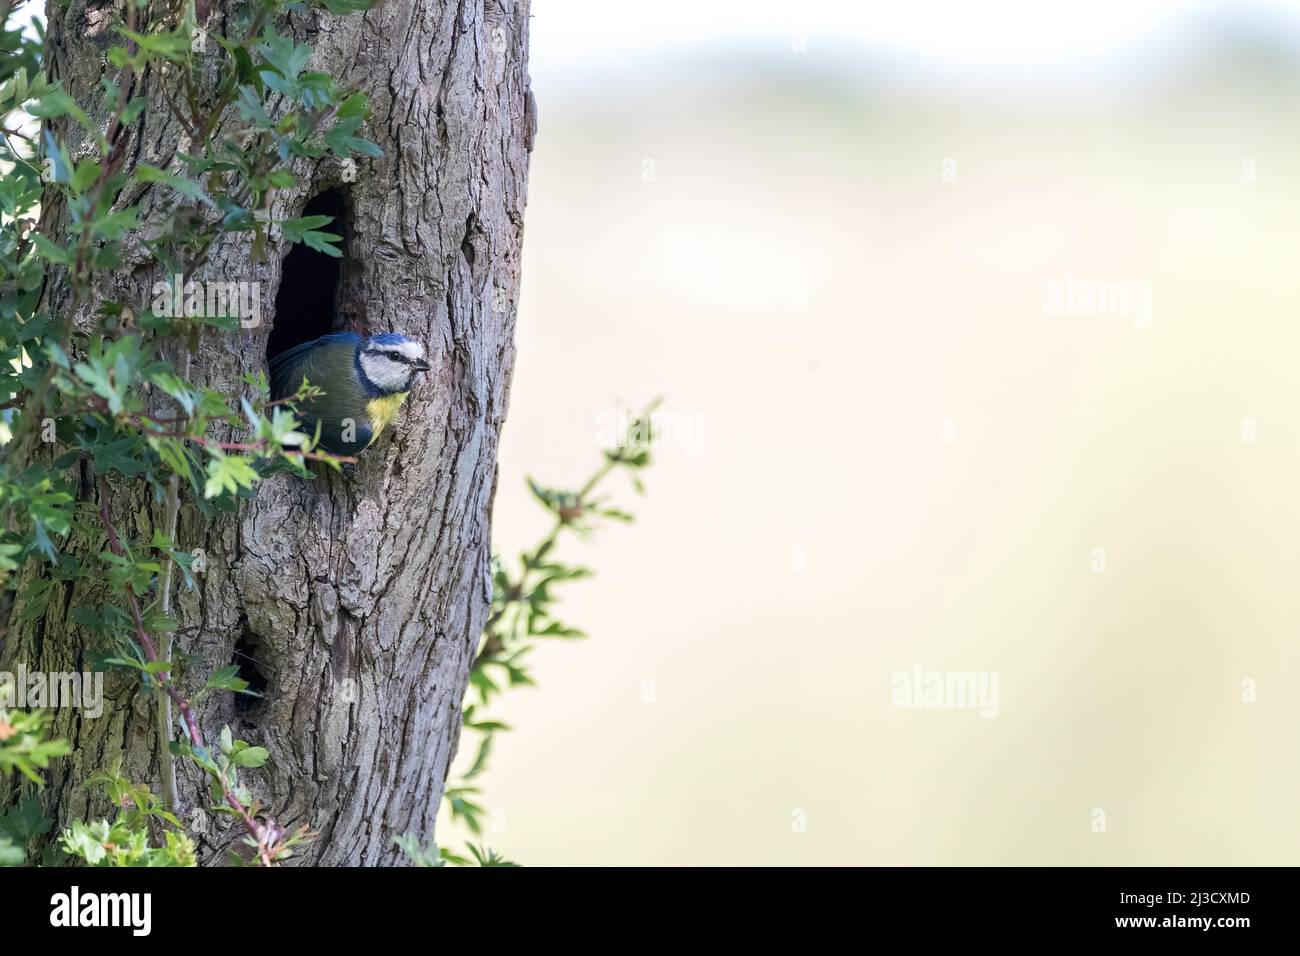 Blue Tit (cyanistes caeruleus) in natural nest hole of tree, with space for copy text Stock Photo